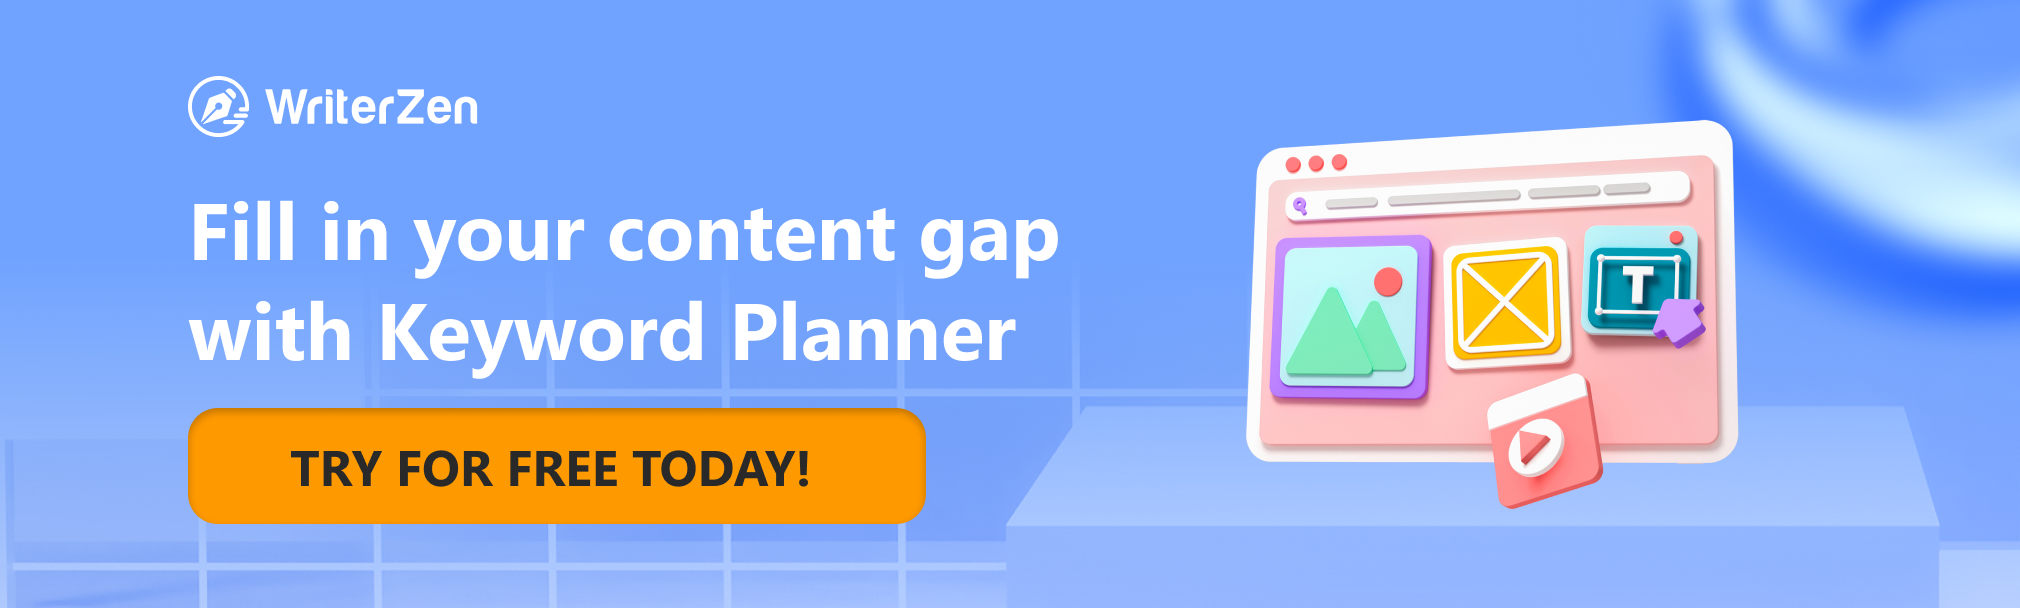 Fill in Your Content Gap with Keyword Planner